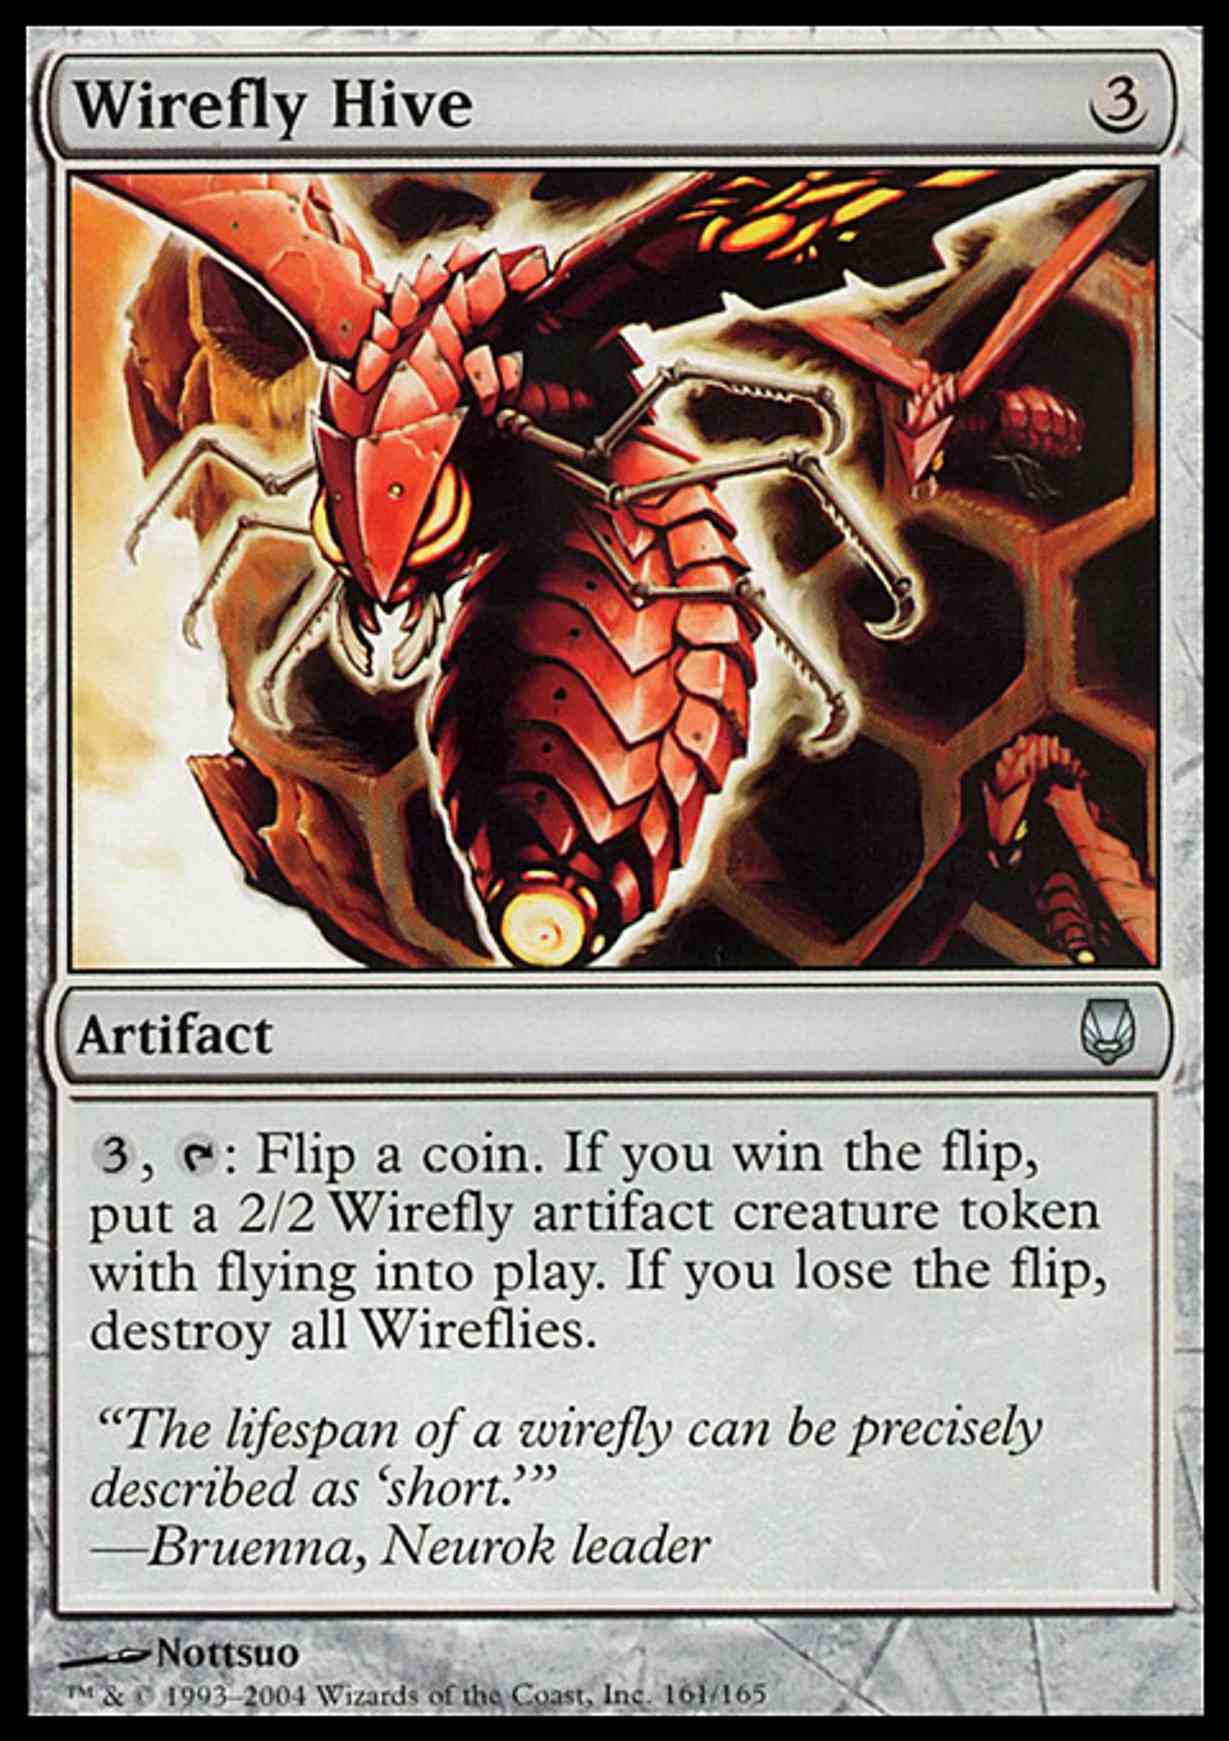 Wirefly Hive magic card front